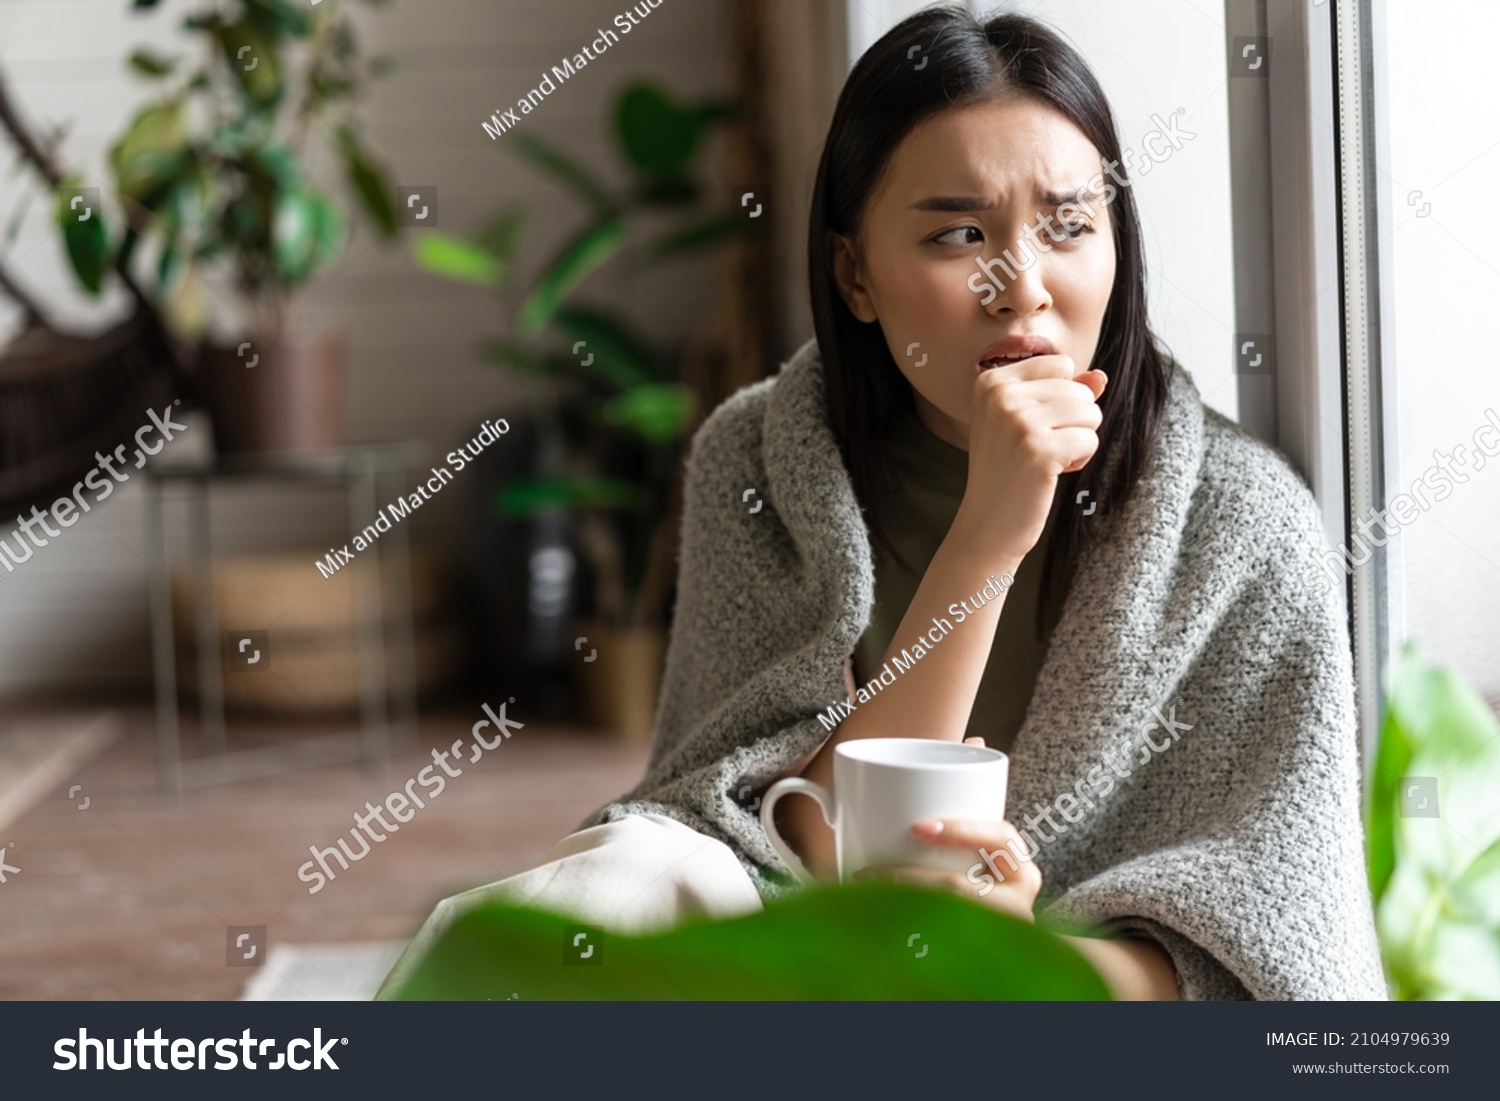 Sad ill asian girl staying on self quarantine during covid, catching flu and sitting at home with cup of tea near window, coughing in hand #2104979639